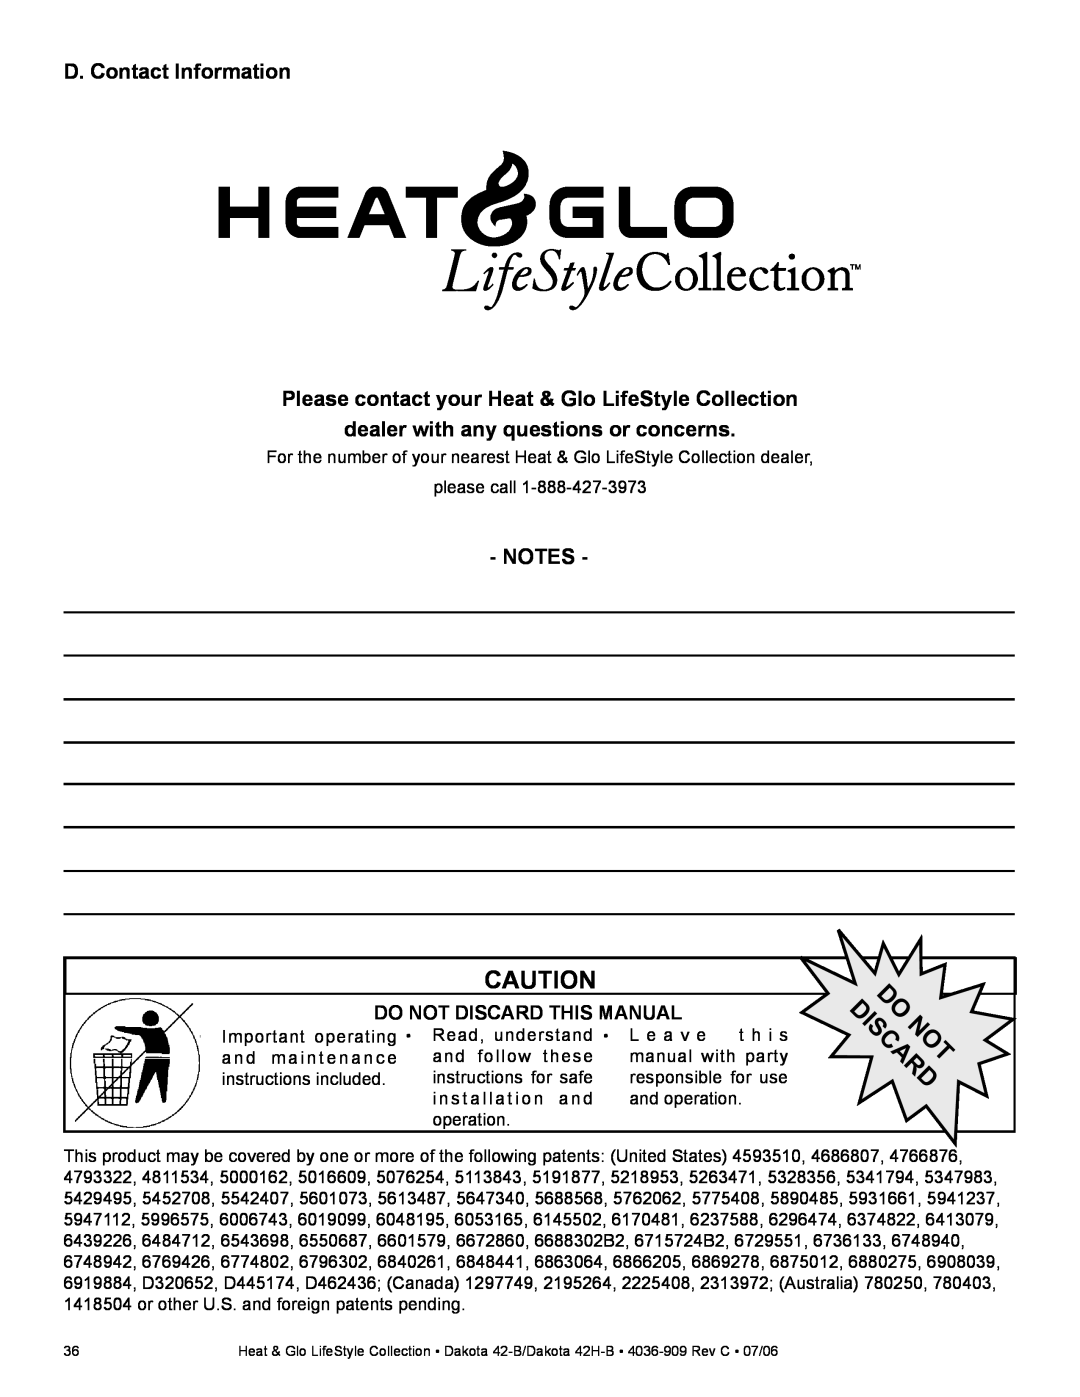 Heat & Glo LifeStyle Heat & Glo Gas Appliance D. Contact Information, dealer with any questions or concerns, Do Discardnot 